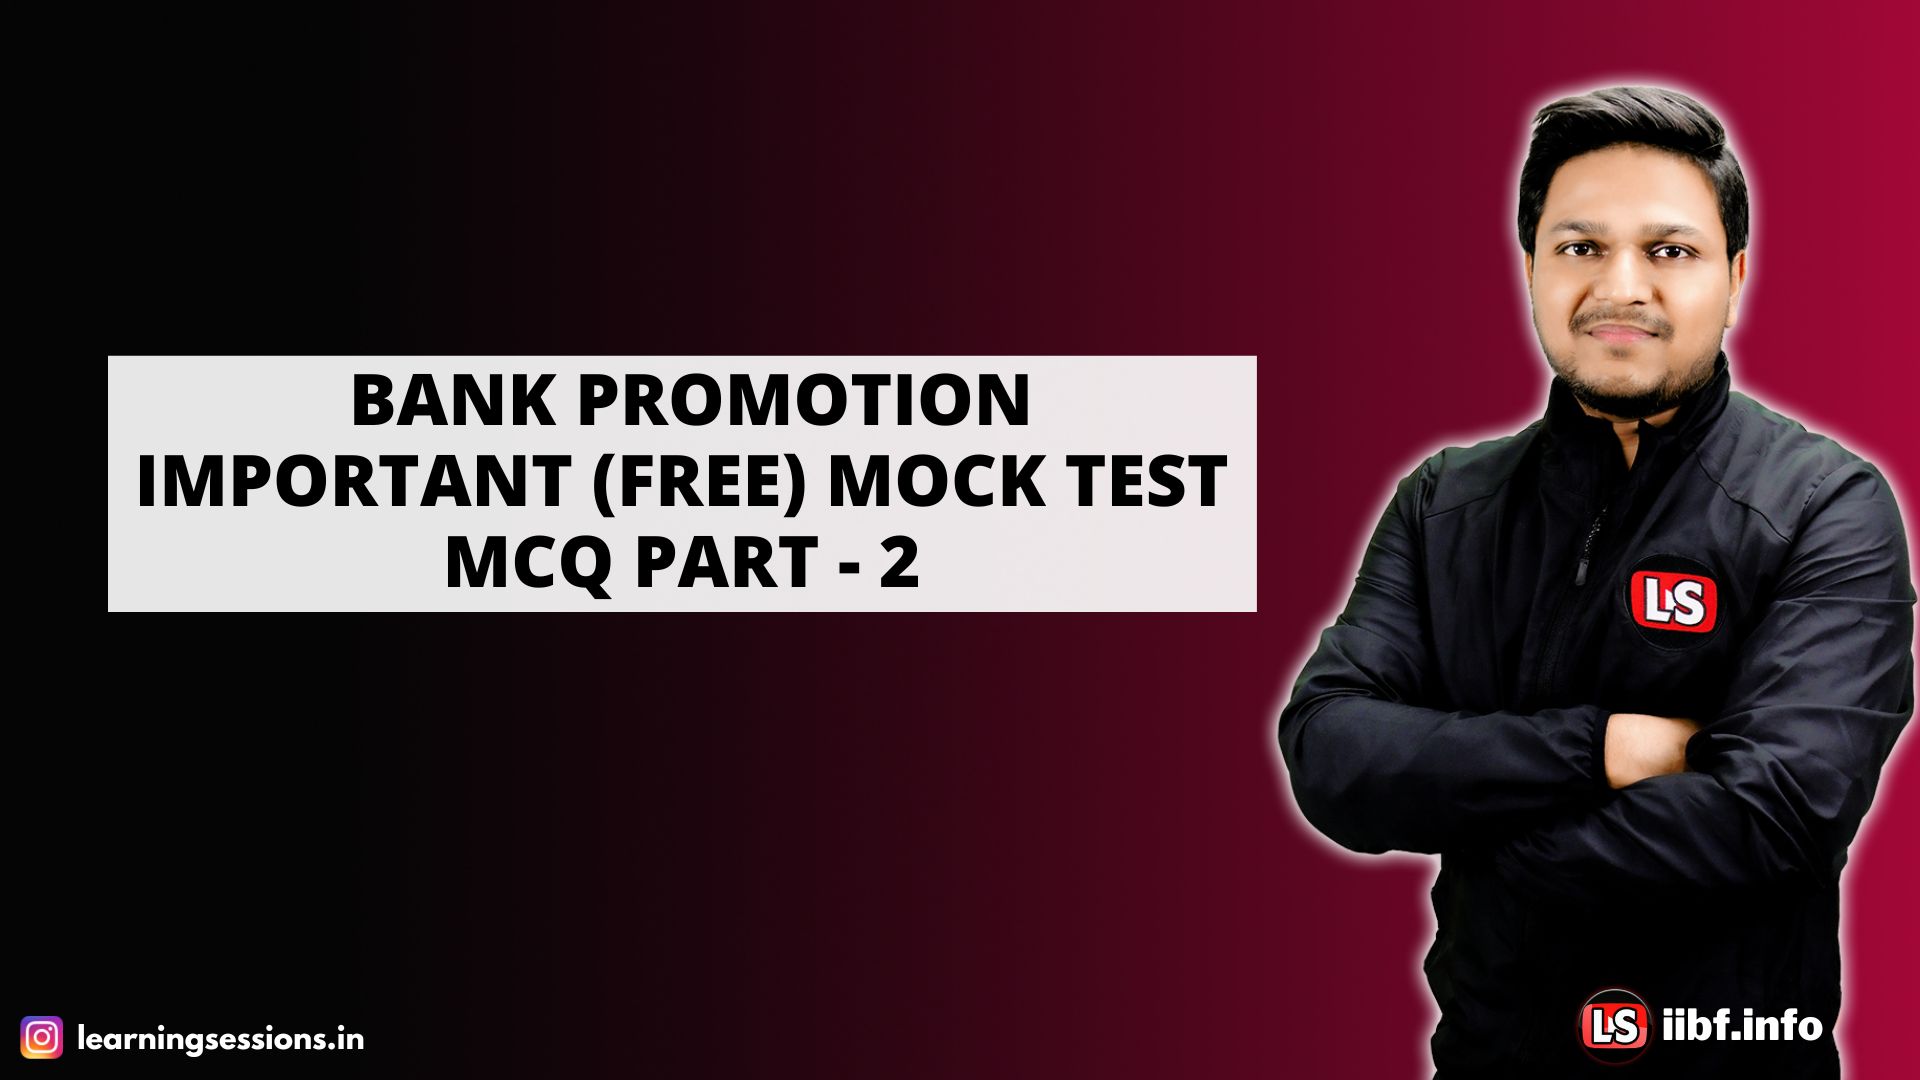 BANK PROMOTION (FREE) MOCK TEST QUESTIONS – PART 2 | BANKING OPERATIONS | IBPS FREE MOCK TESTS | INTERNAL PROMOTION EXAMS | 2022-23